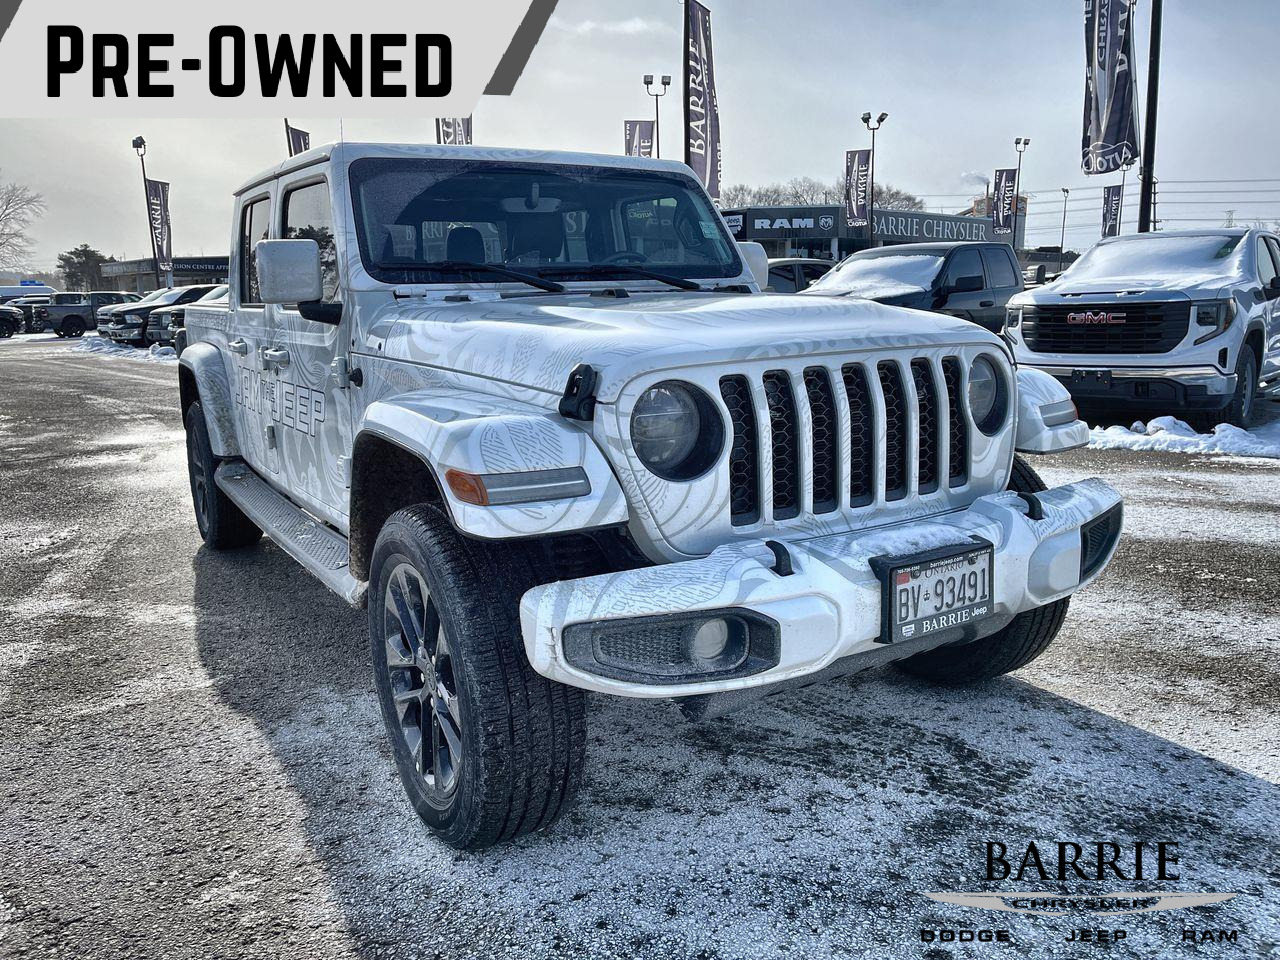 2022 Jeep Gladiator DEMO I 8.4-INCH DISPLAY WITH NAVIGATION I FRONT HE